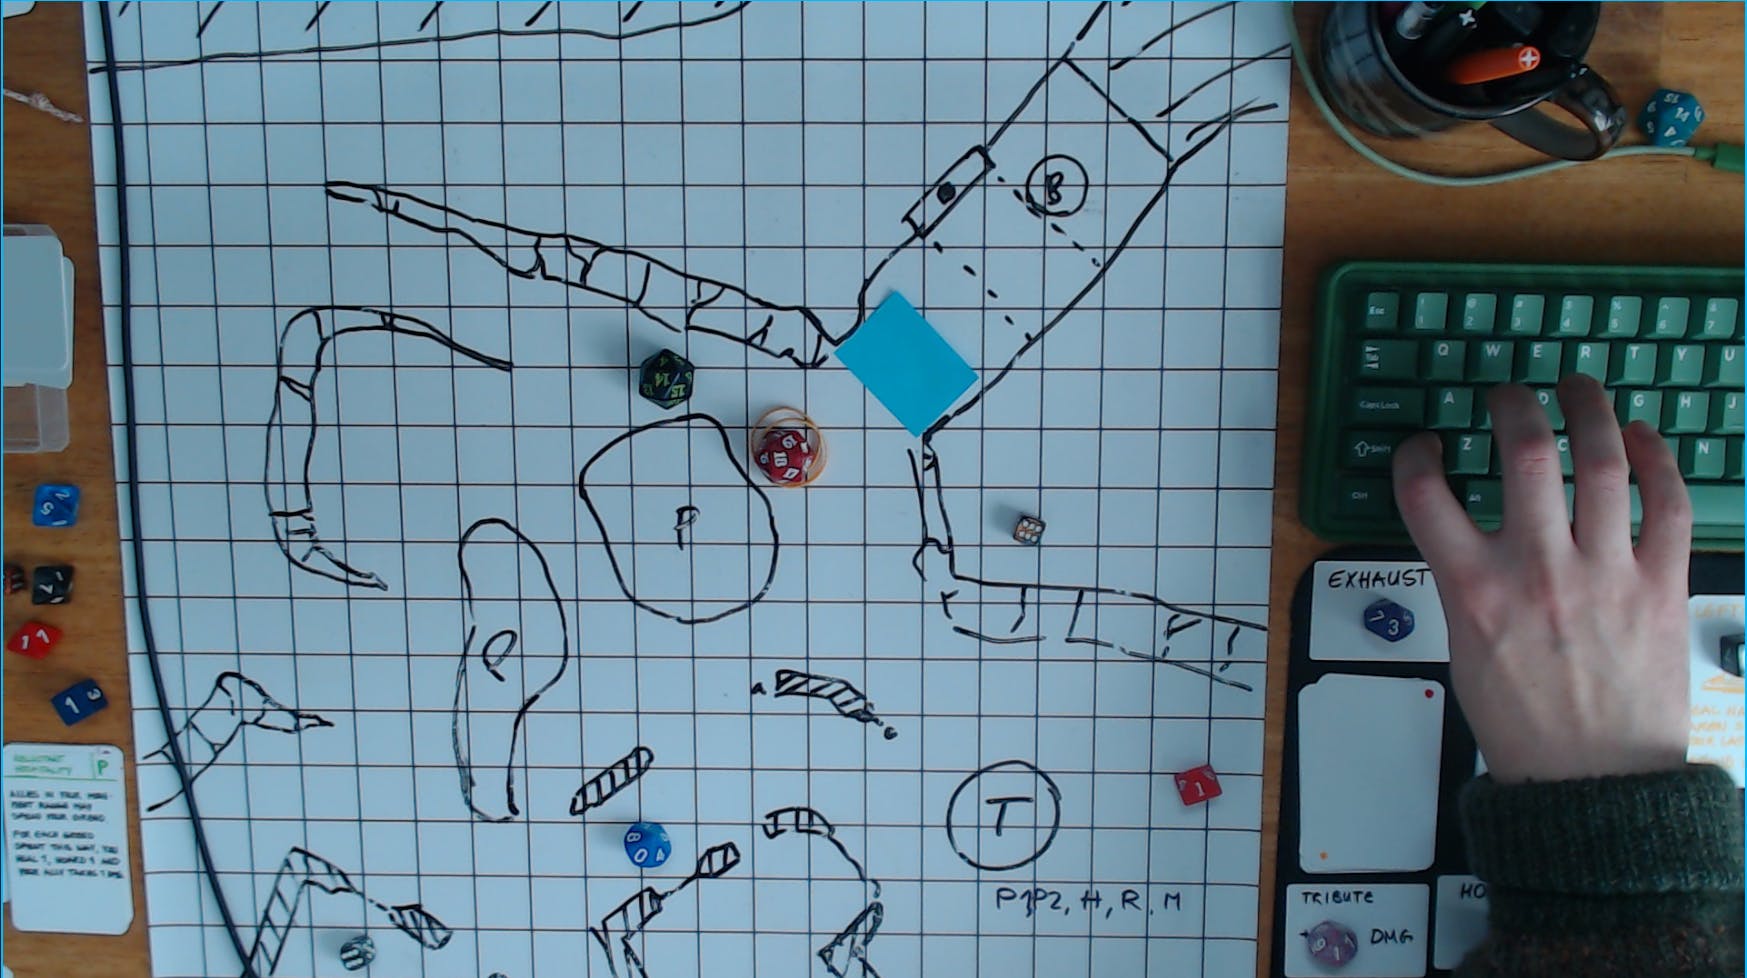 Screencap of a playtesting session showing the webcam view of a dry erase mat featuring a level layout and dice